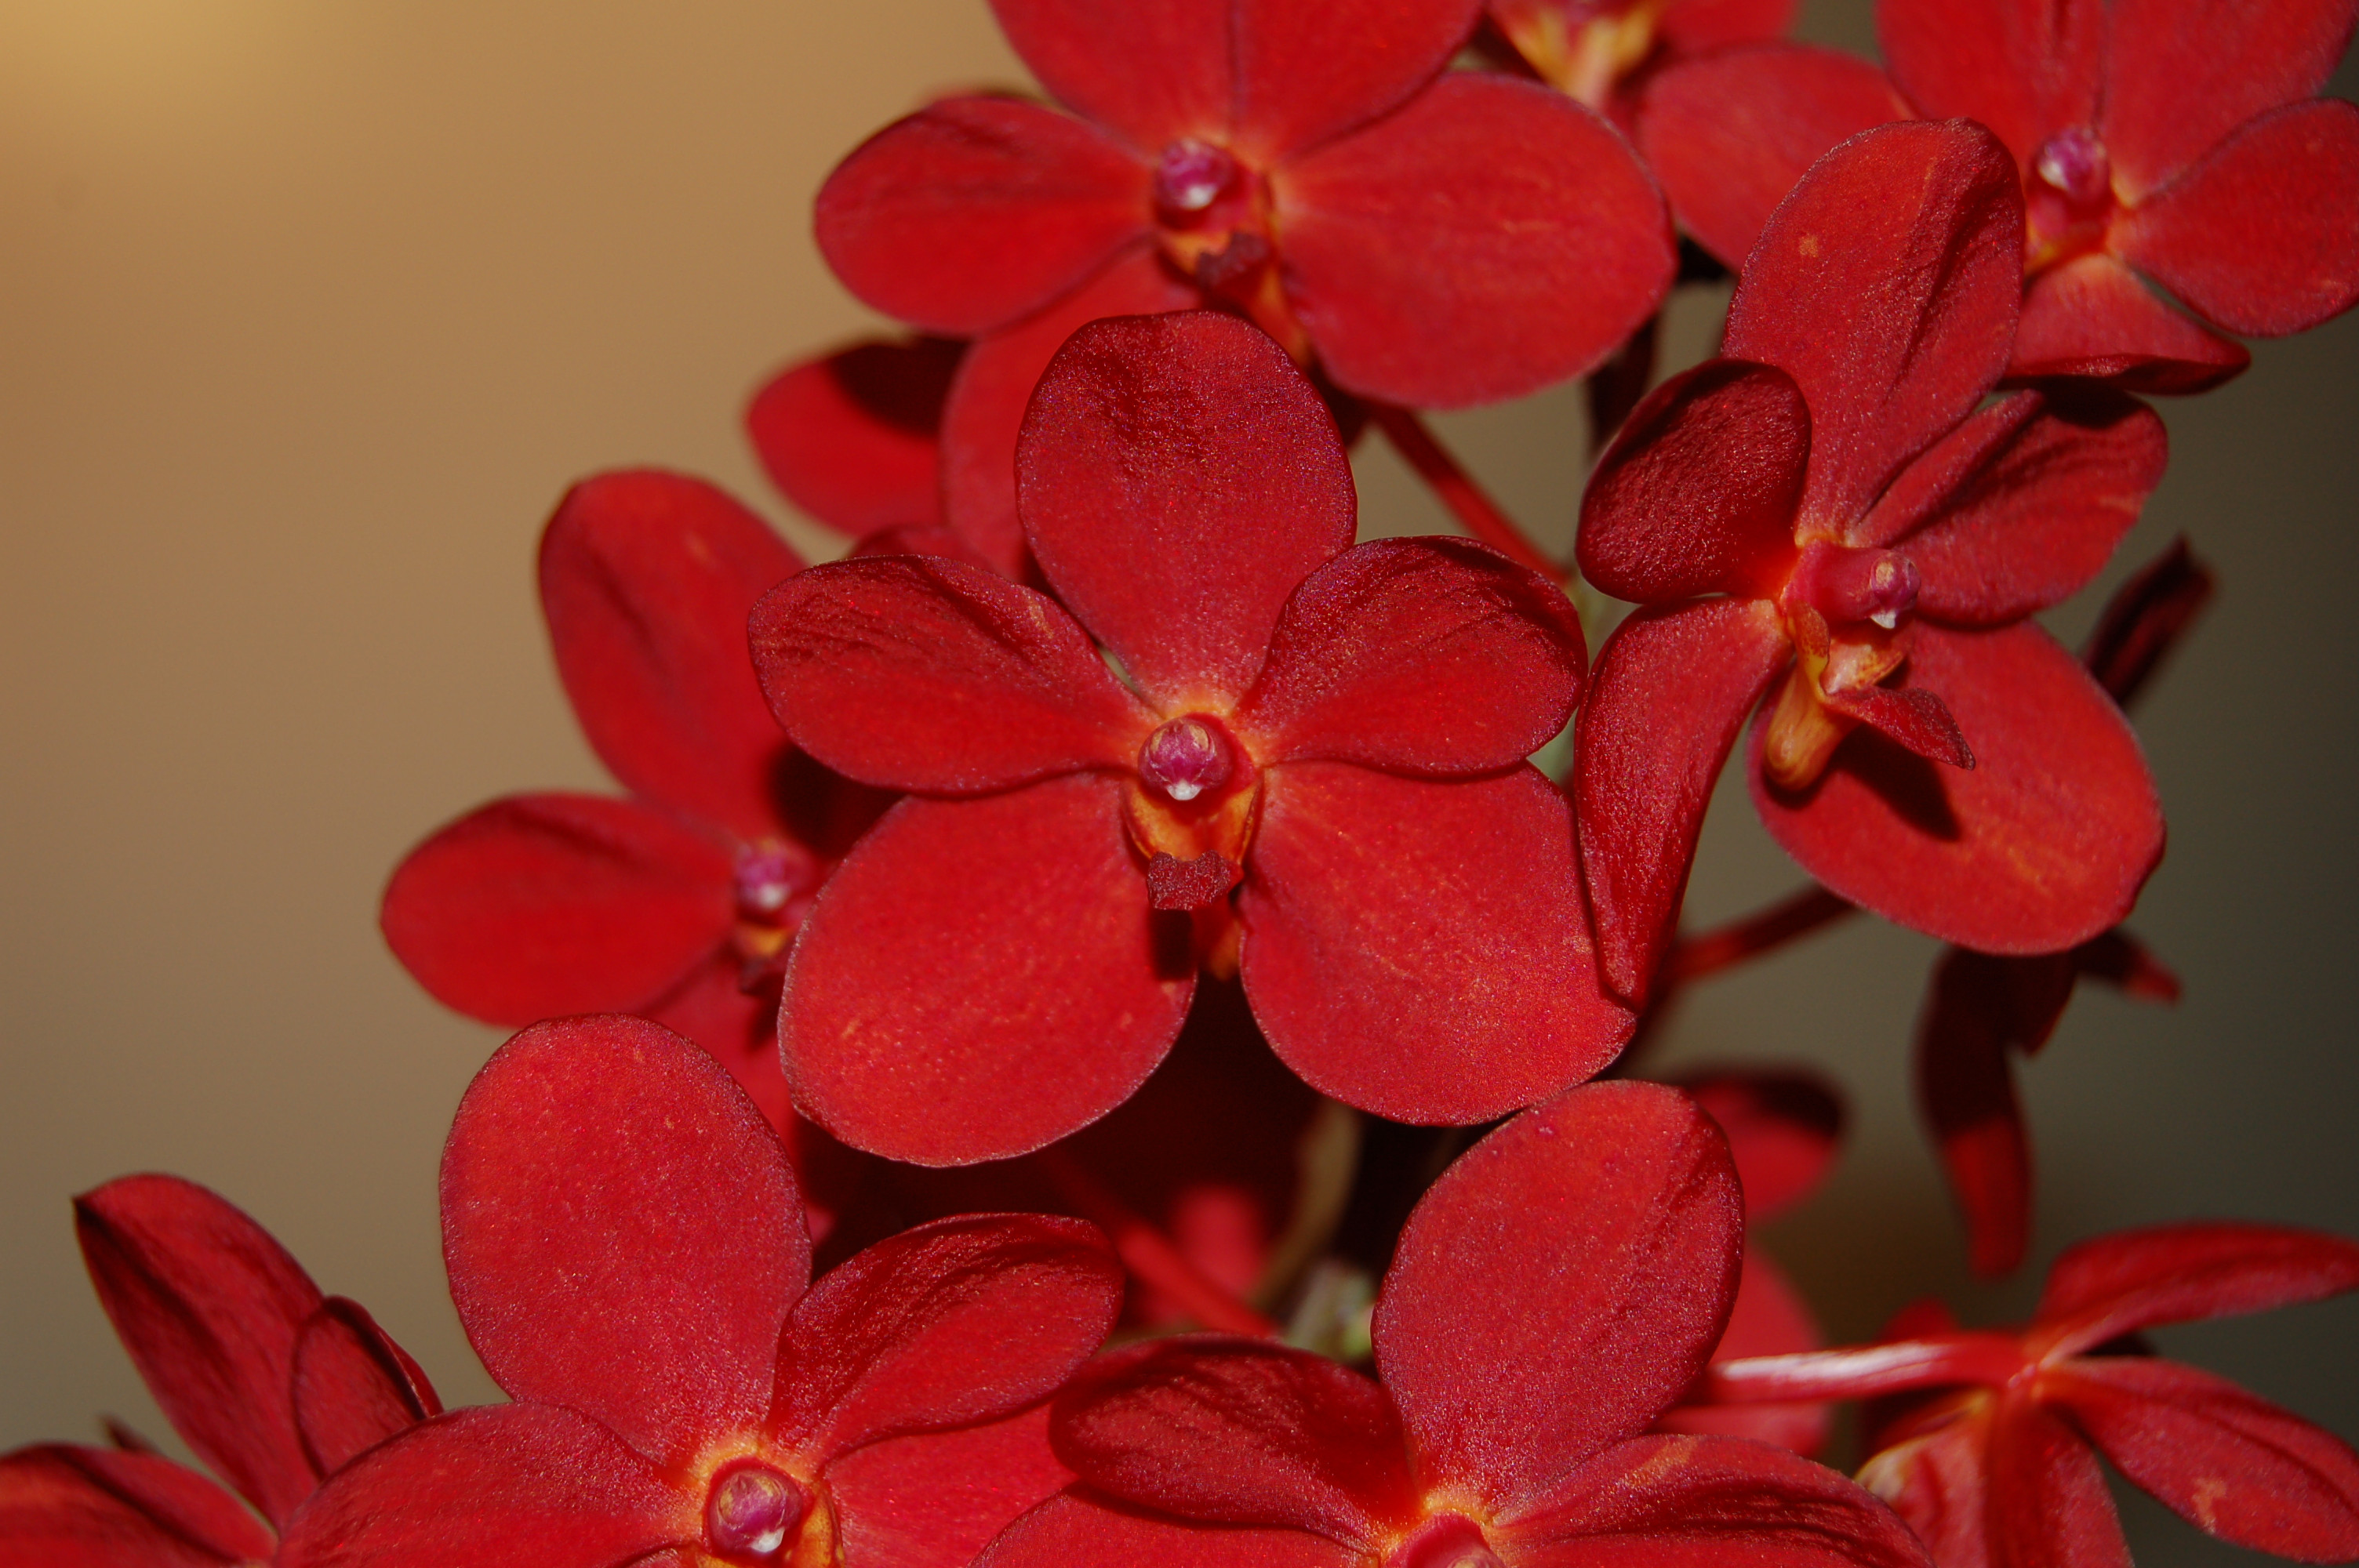 Ascocenda Red Fire | Orchideen-Wichmann.de - Highest horticultural quality  and experience since 1897